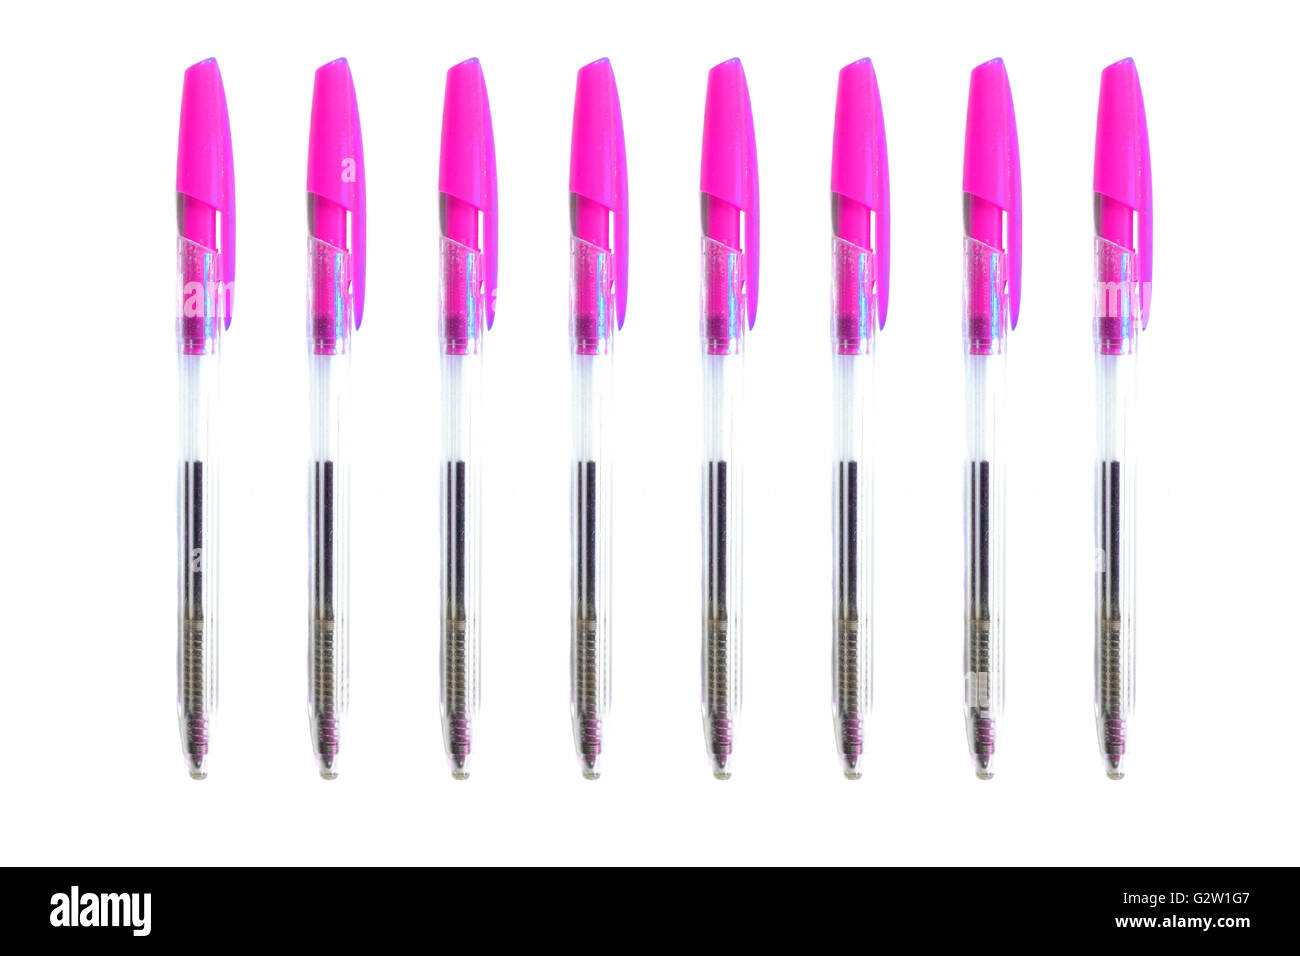 Pink biro pens photographed against a white background. Stock Photo